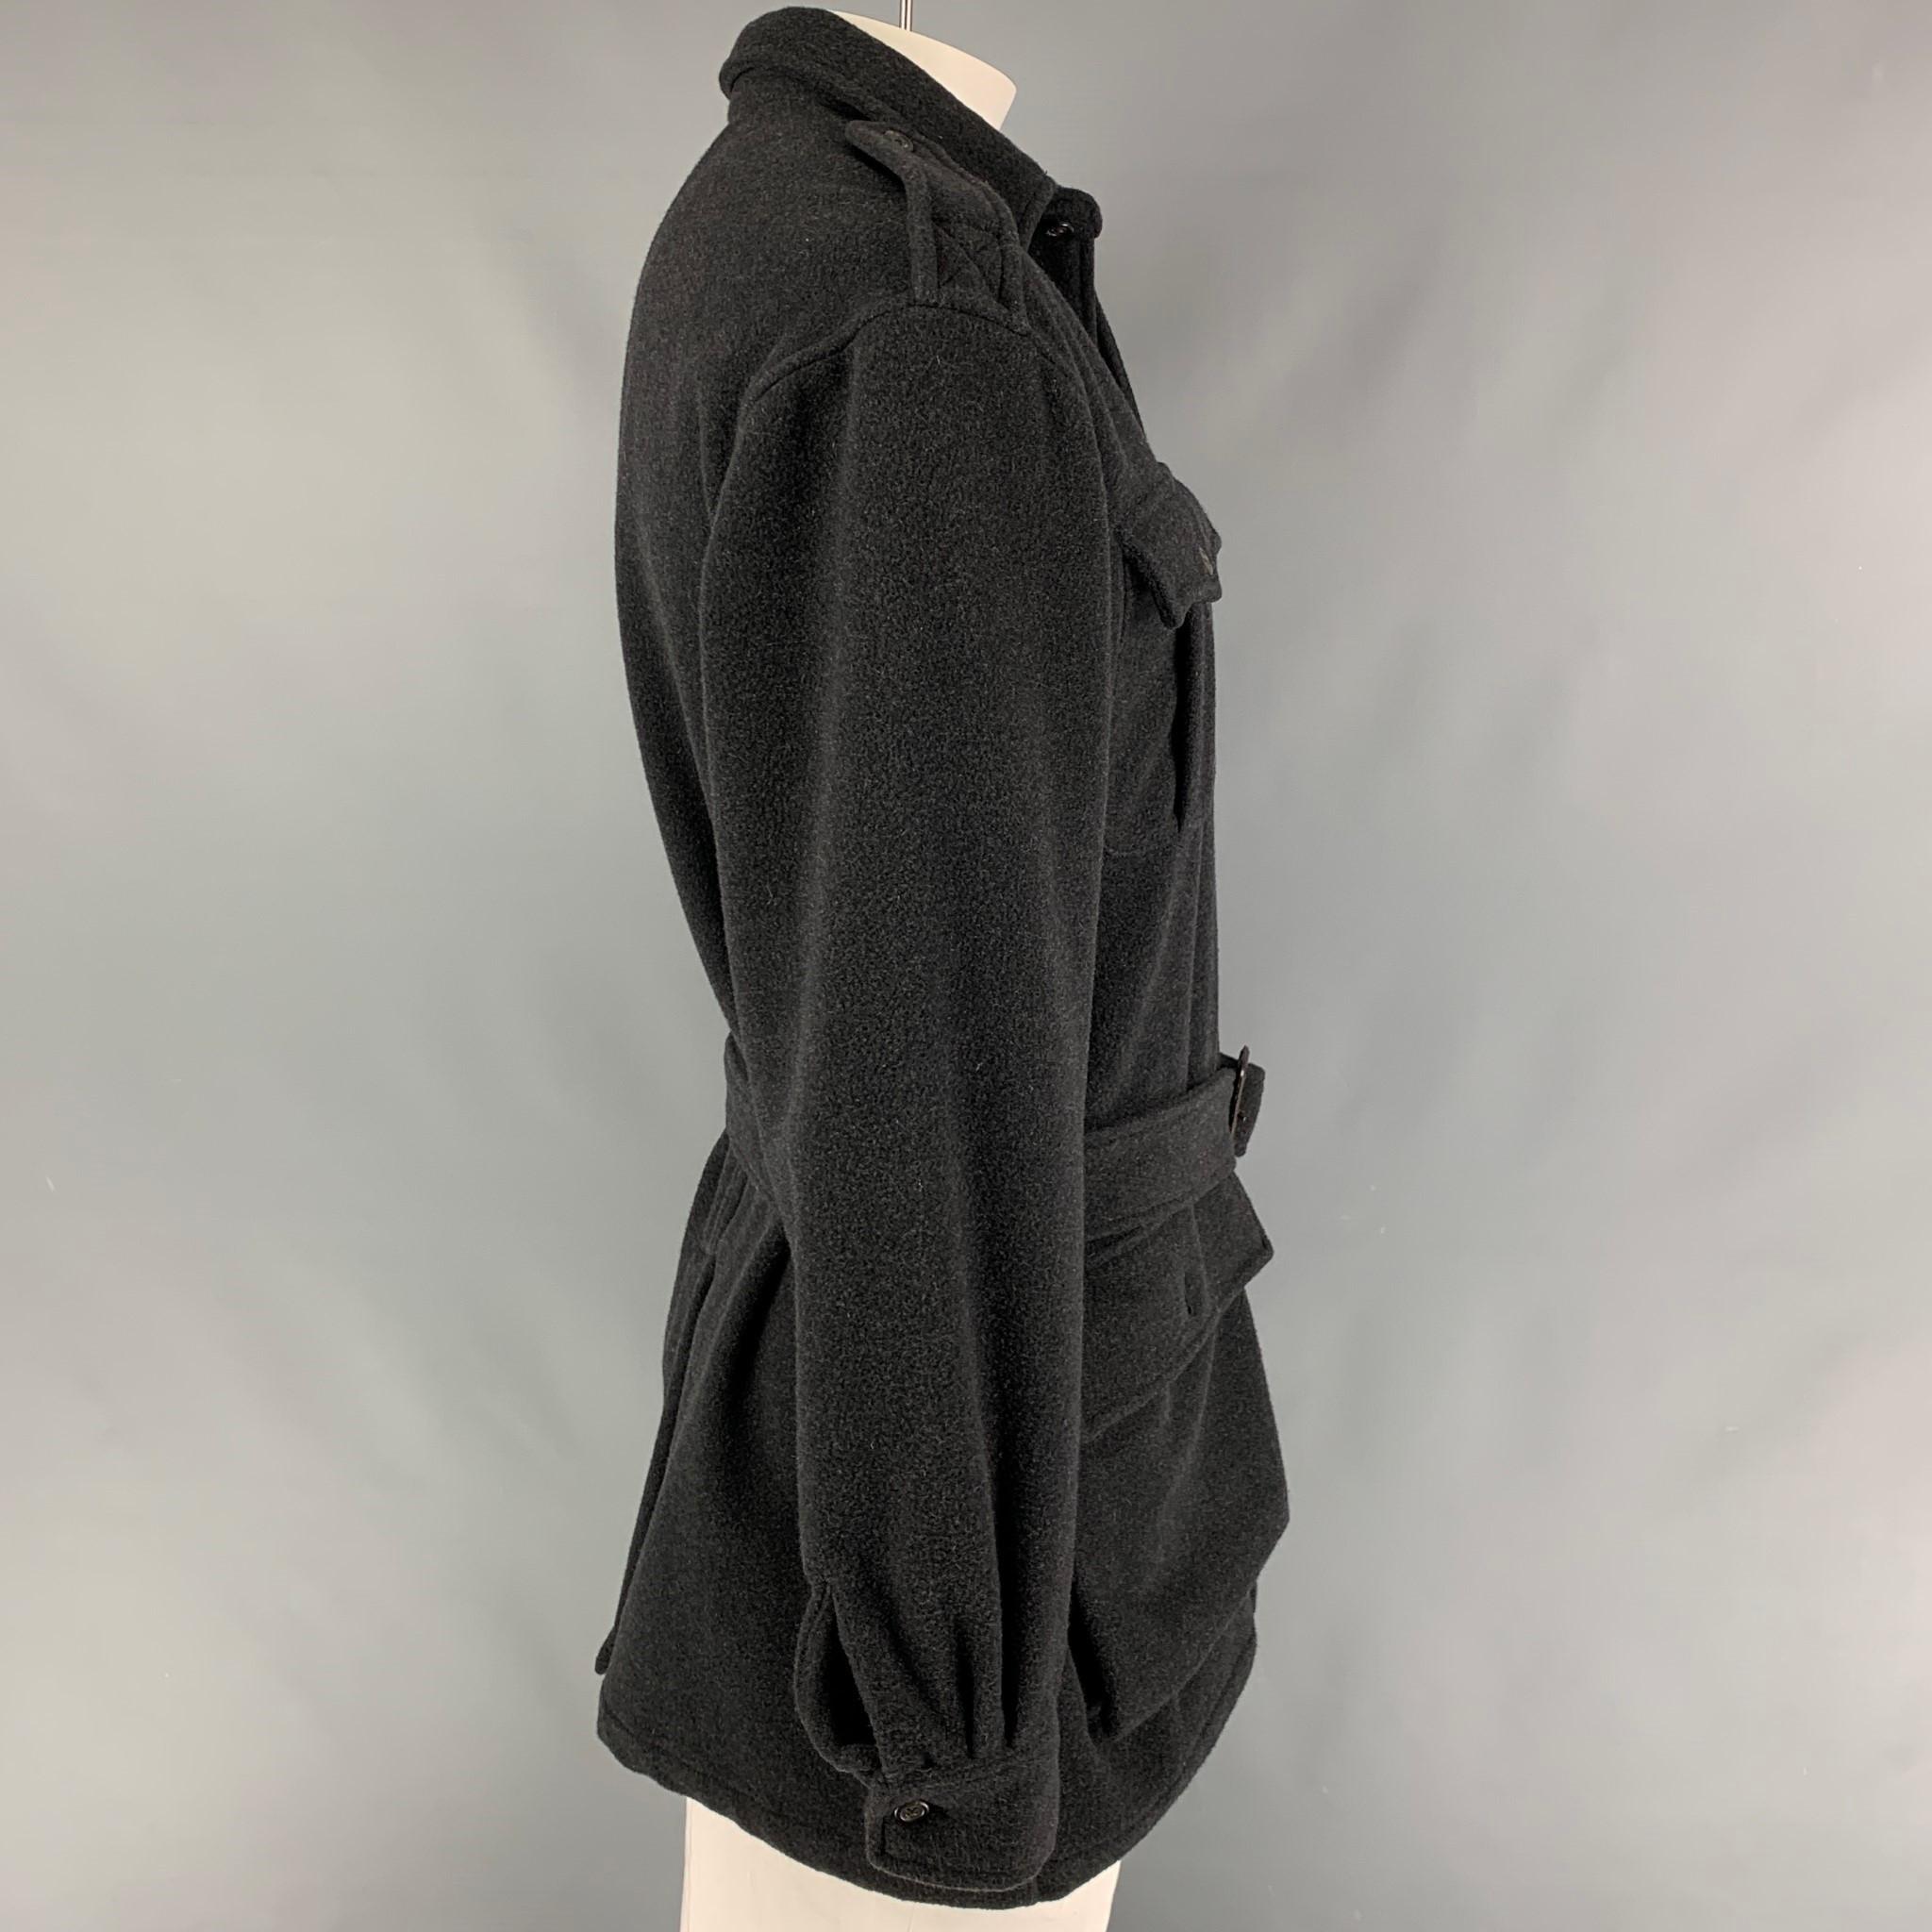 POLO by RALPH LAUREN coat comes in a dark gray cashmere featuring a belted style, epaulettes, patch pockets, single back vent, and a buttoned closure. 

Very Good Pre-Owned Condition.
Marked: M

Measurements:

Shoulder: 21.5 in.
Chest: 48